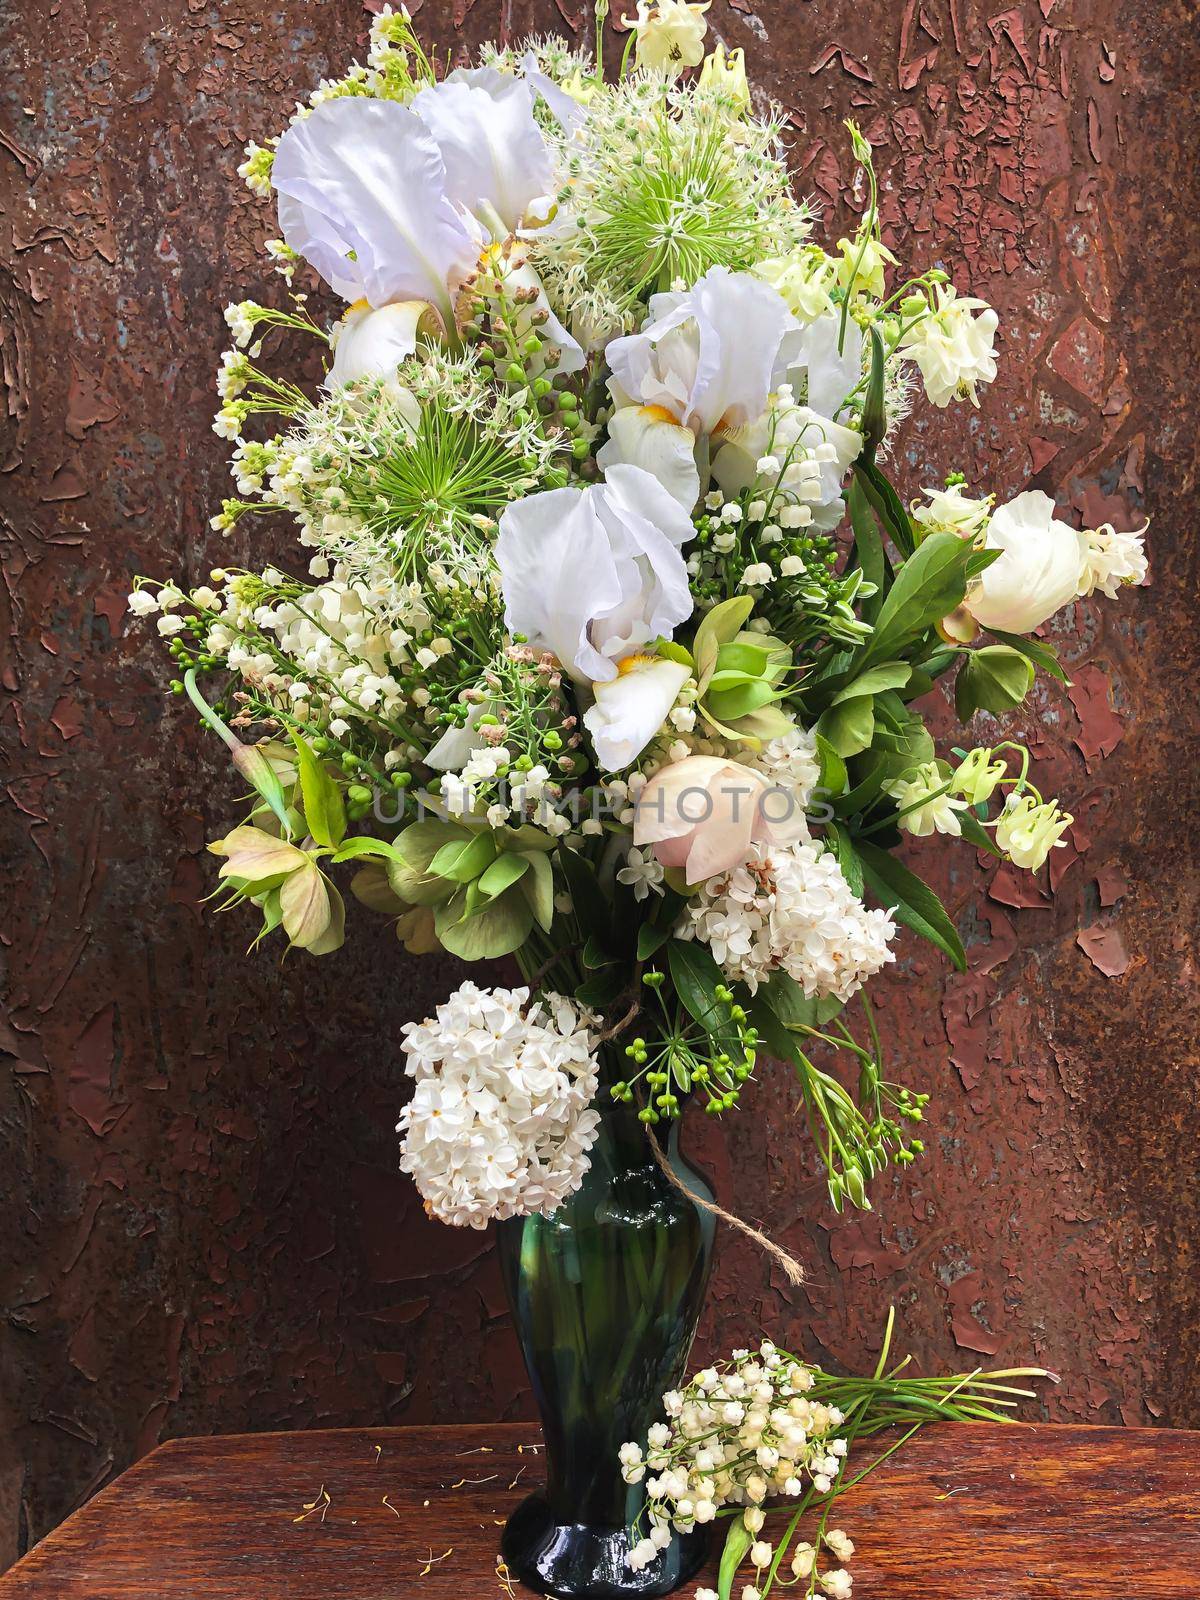 Romantic bouquets of flowers. Home decor and flowers arranging. Spring bouquet with irises, lilies of the valley, aliums and other garden flowers